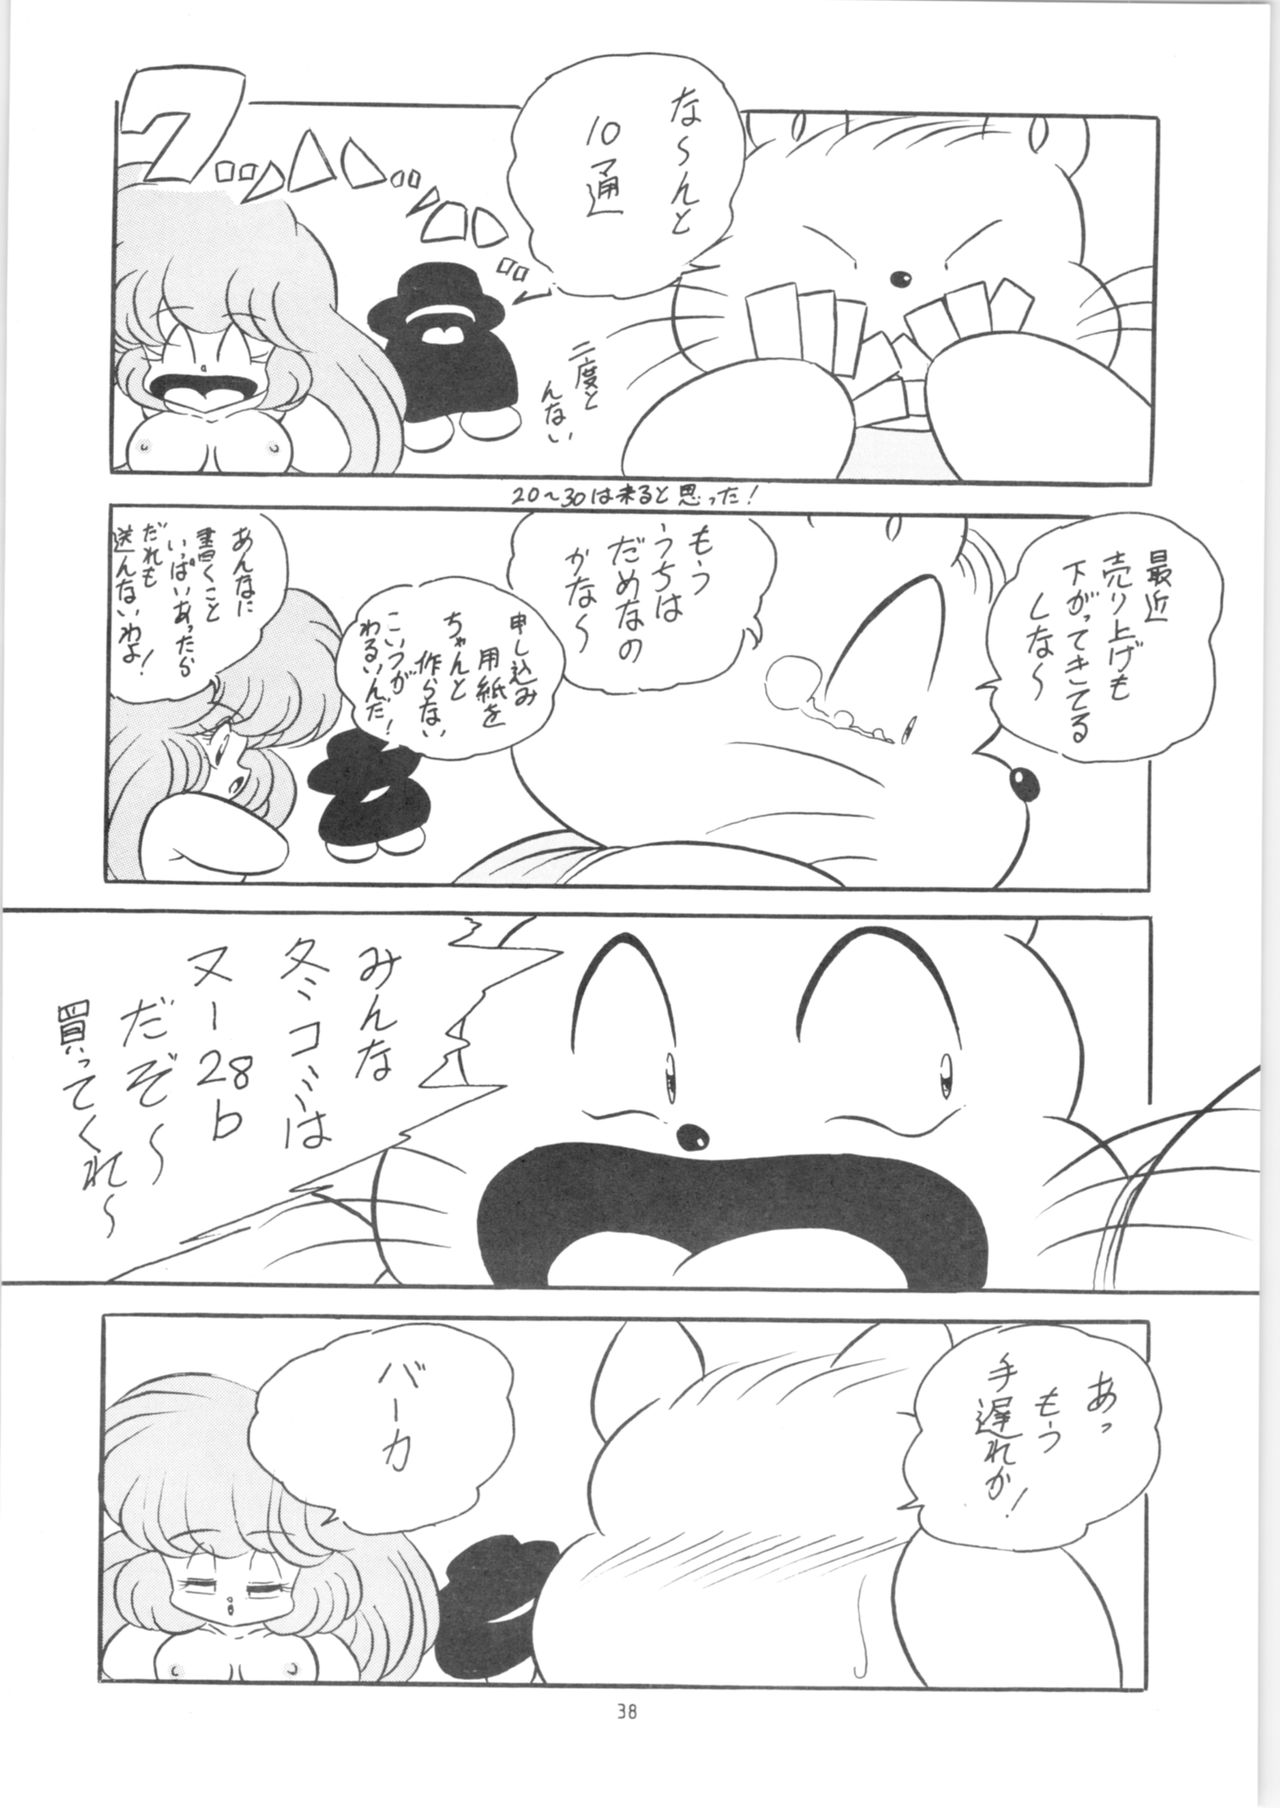 [C-COMPANY] C-COMPANY SPECIAL STAGE 13 (Ranma 1/2) page 39 full